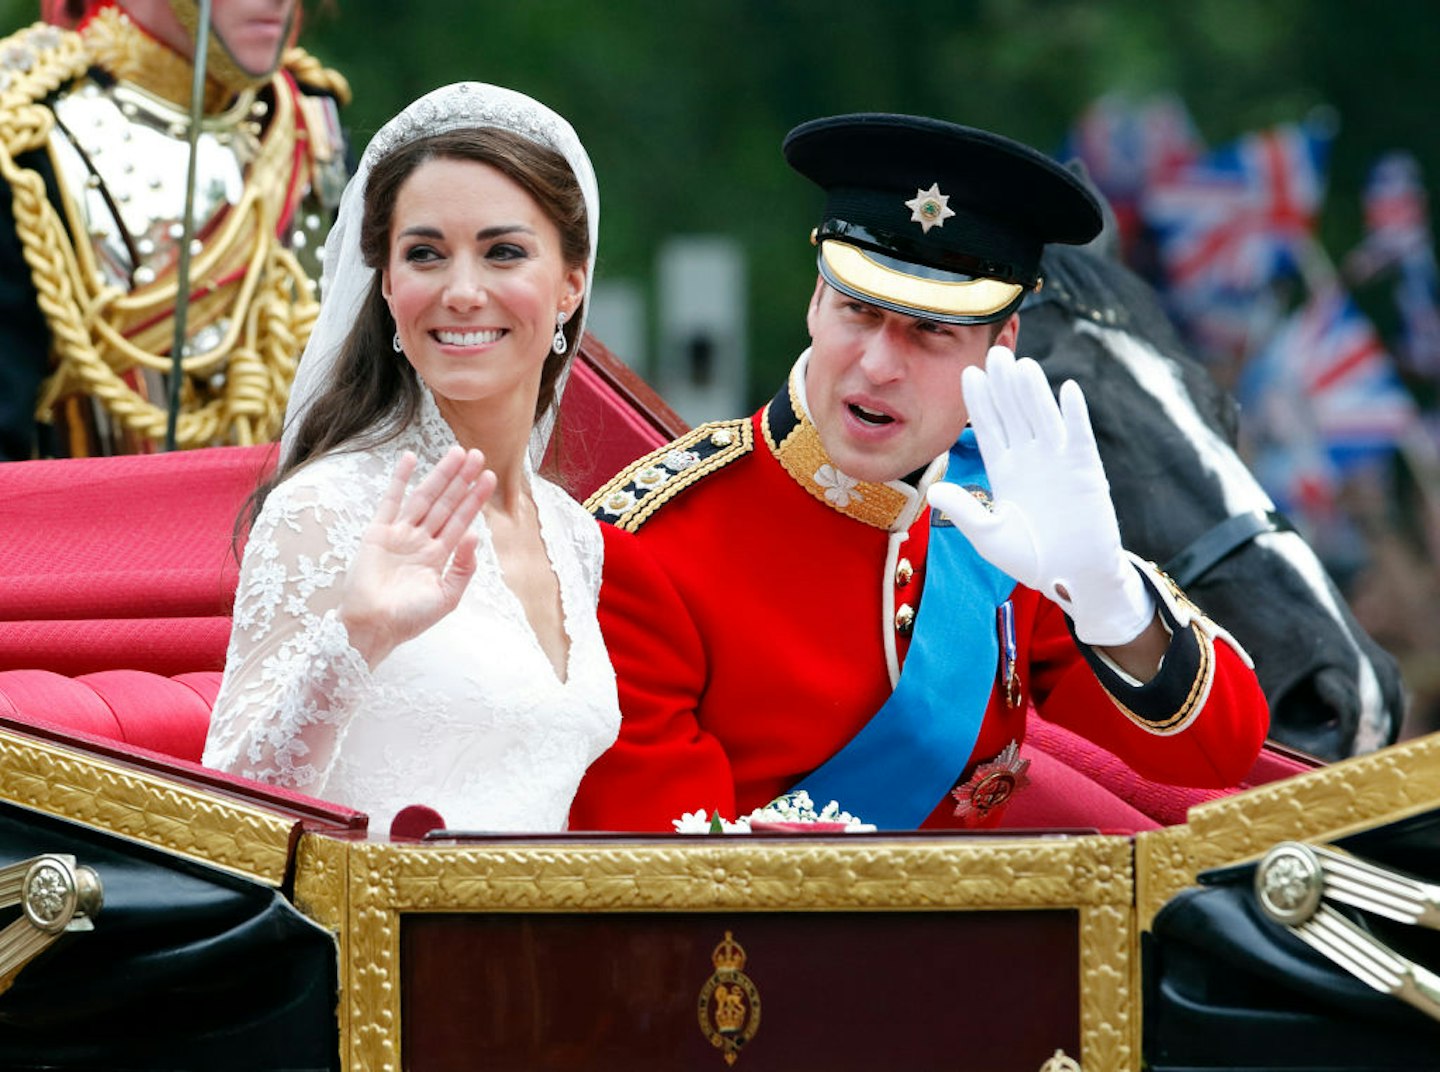 Prince William and Kate Middleton's wedding